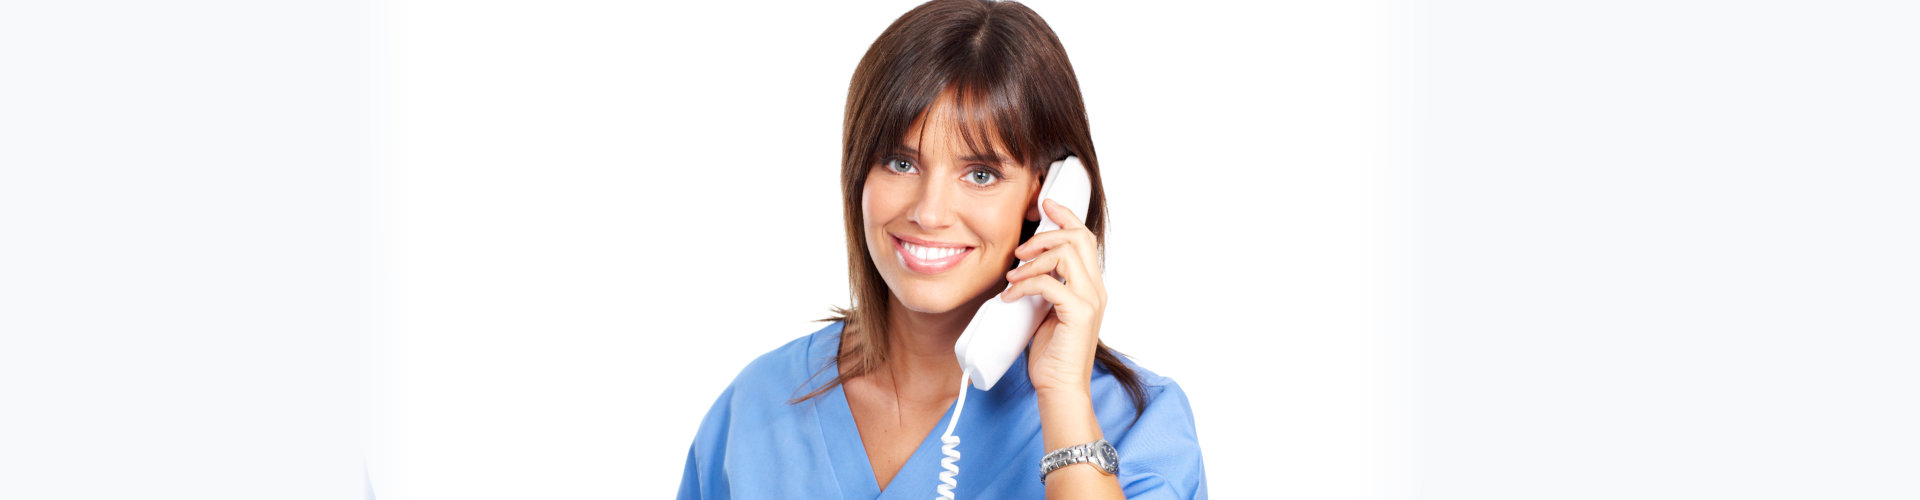 caregiver answering the telephone call